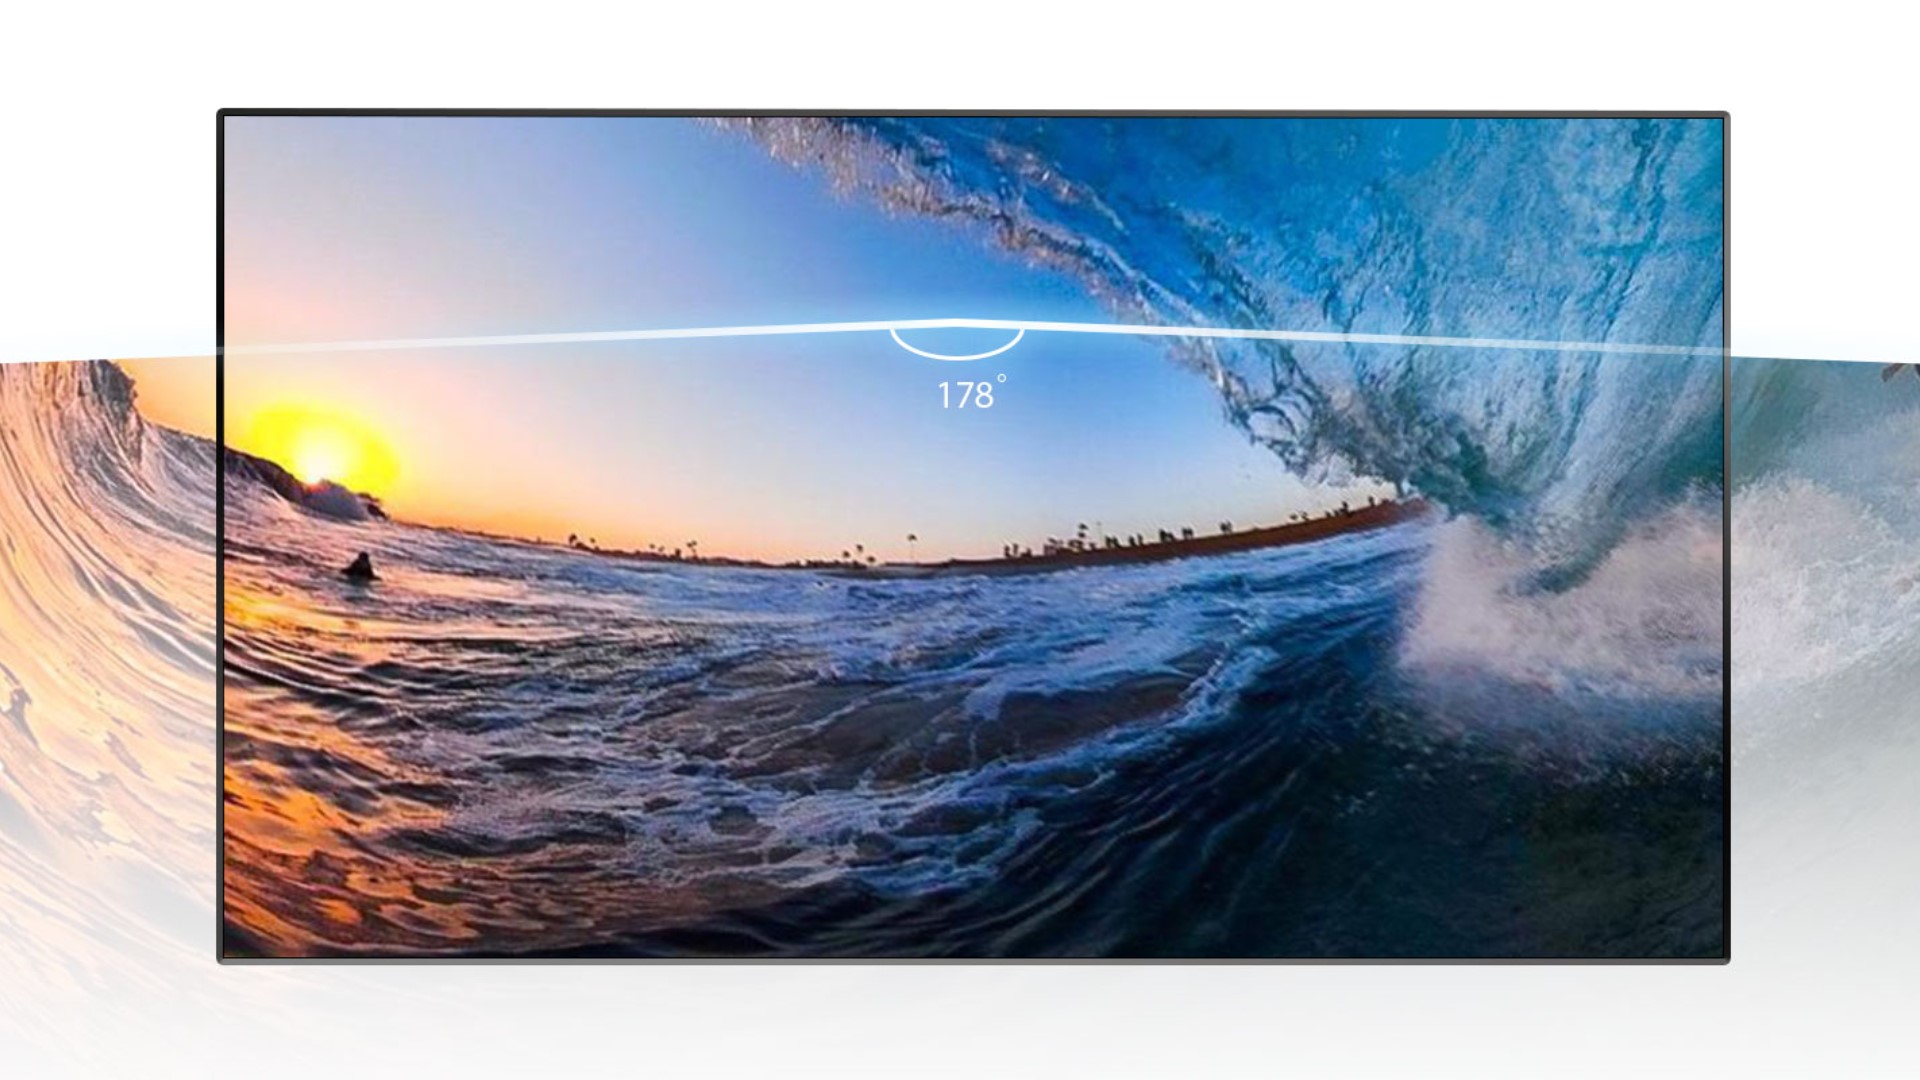 TCL HD tv D315 wide viewing angle